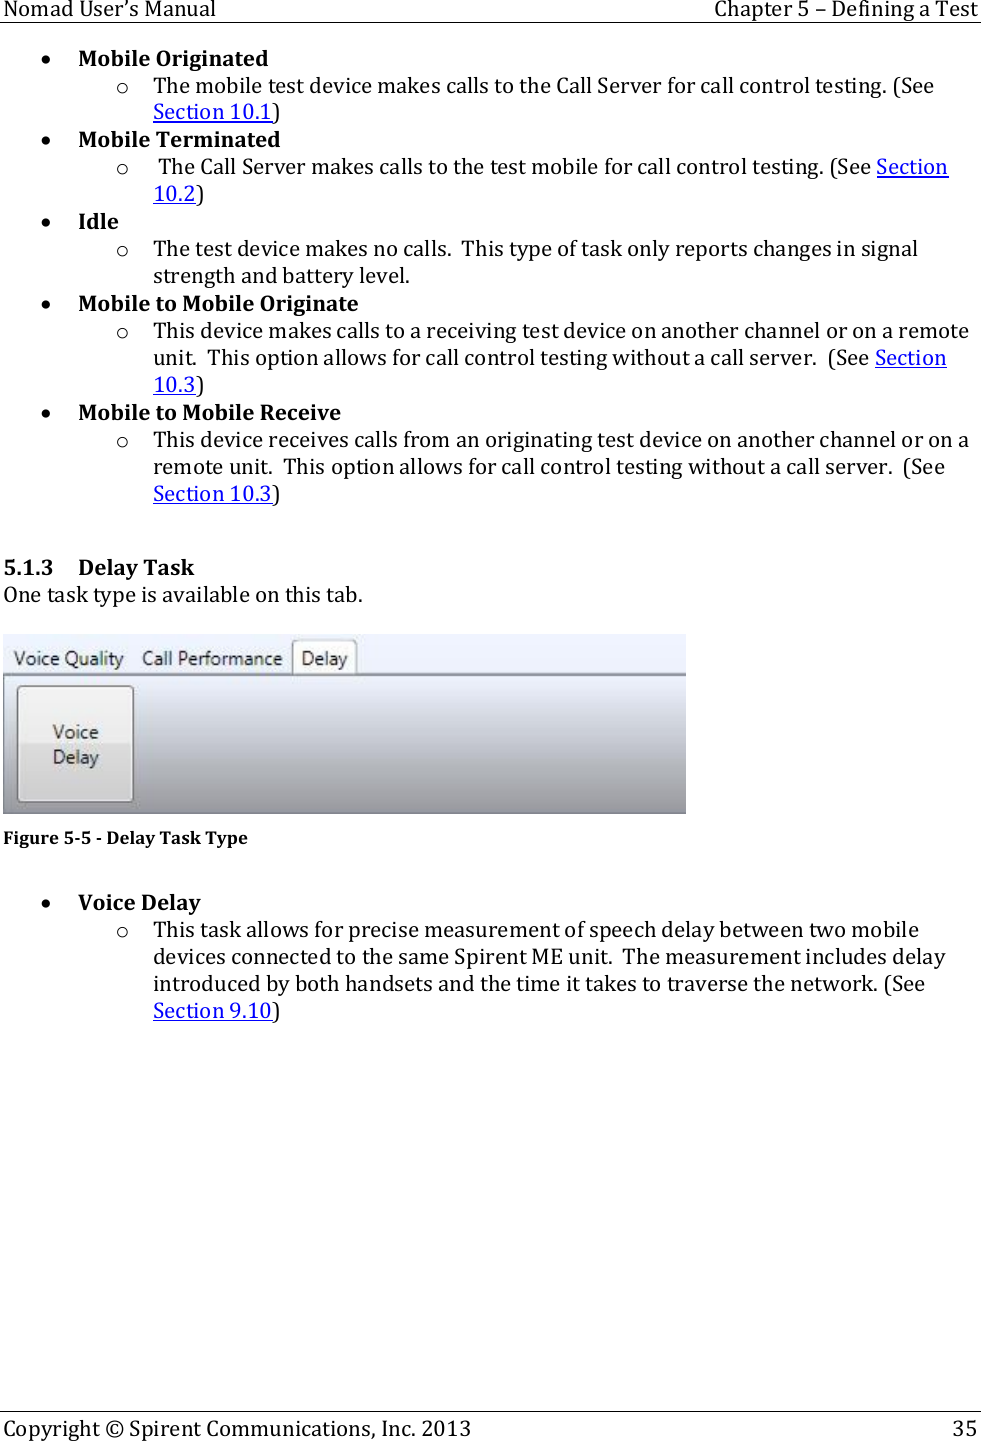  Nomad User’s Manual  Chapter 5 – Defining a Test Copyright © Spirent Communications, Inc. 2013    35   Mobile Originated o The mobile test device makes calls to the Call Server for call control testing. (See Section 10.1)  Mobile Terminated o  The Call Server makes calls to the test mobile for call control testing. (See Section 10.2)  Idle o The test device makes no calls.  This type of task only reports changes in signal strength and battery level.  Mobile to Mobile Originate o This device makes calls to a receiving test device on another channel or on a remote unit.  This option allows for call control testing without a call server.  (See Section 10.3)  Mobile to Mobile Receive o This device receives calls from an originating test device on another channel or on a remote unit.  This option allows for call control testing without a call server.  (See Section 10.3)  5.1.3 Delay Task One task type is available on this tab.   Figure 5-5 - Delay Task Type   Voice Delay o This task allows for precise measurement of speech delay between two mobile devices connected to the same Spirent ME unit.  The measurement includes delay introduced by both handsets and the time it takes to traverse the network. (See Section 9.10)      